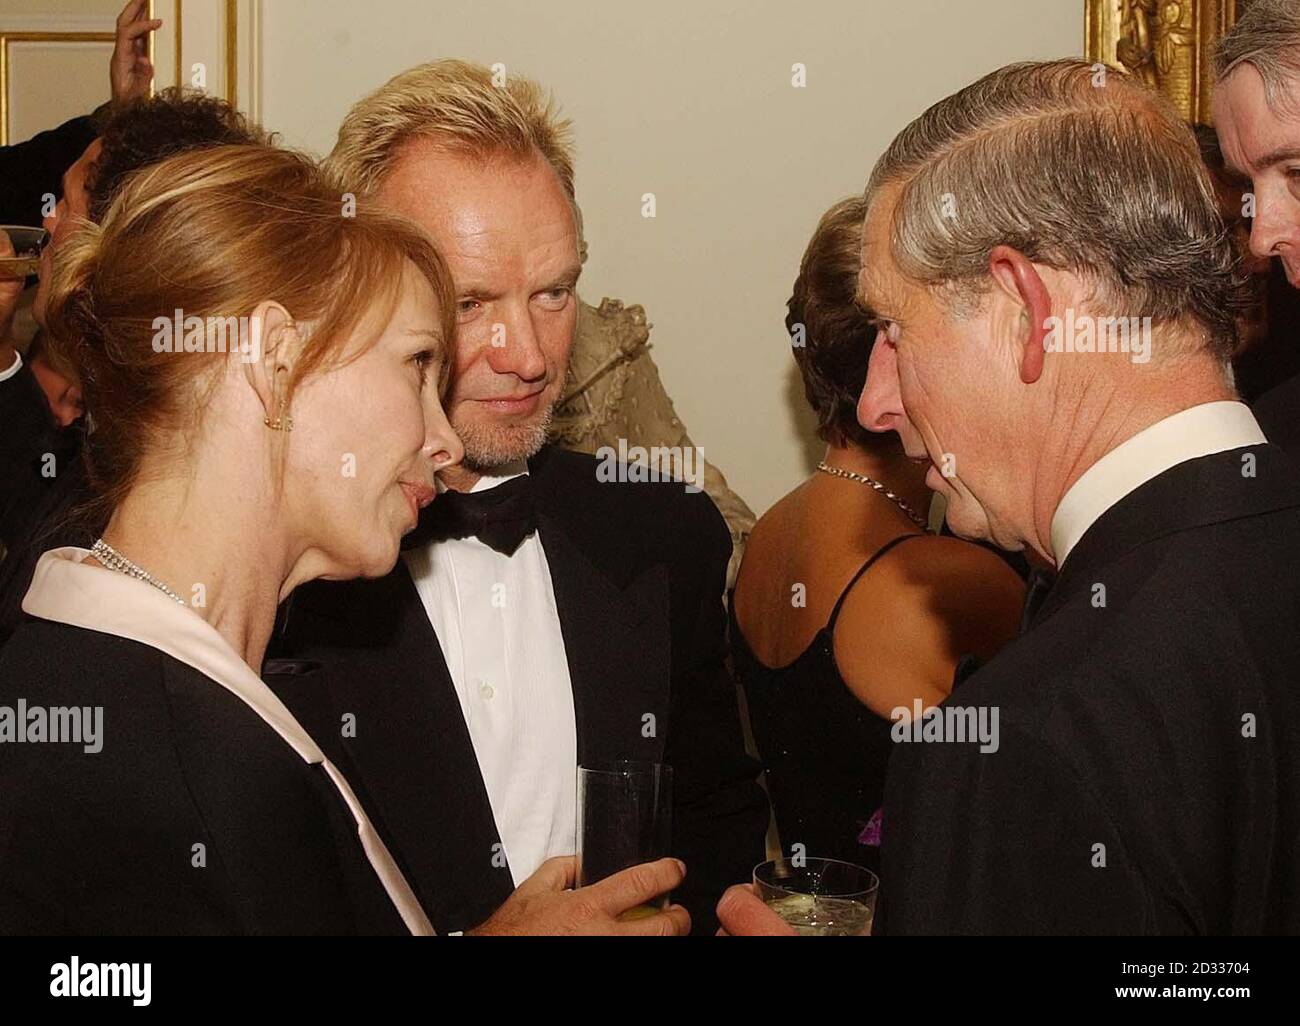 The Prince of Wales talks to pop star Sting and his wife Trudie Styler at a reception at Clarence House, his official London residence, where celebrity chef Jamie Oliver and his young team from the restaurant Fifteen cooked an organic feast for the Prince and VIP guests. The Prince was hosting the meal to mark the progress of organic food and farming over the last ten years. The Prince is an avid fan of organic farming and his own produce range Duchy Originals is one of the UK's leading organic food brands. Stock Photo